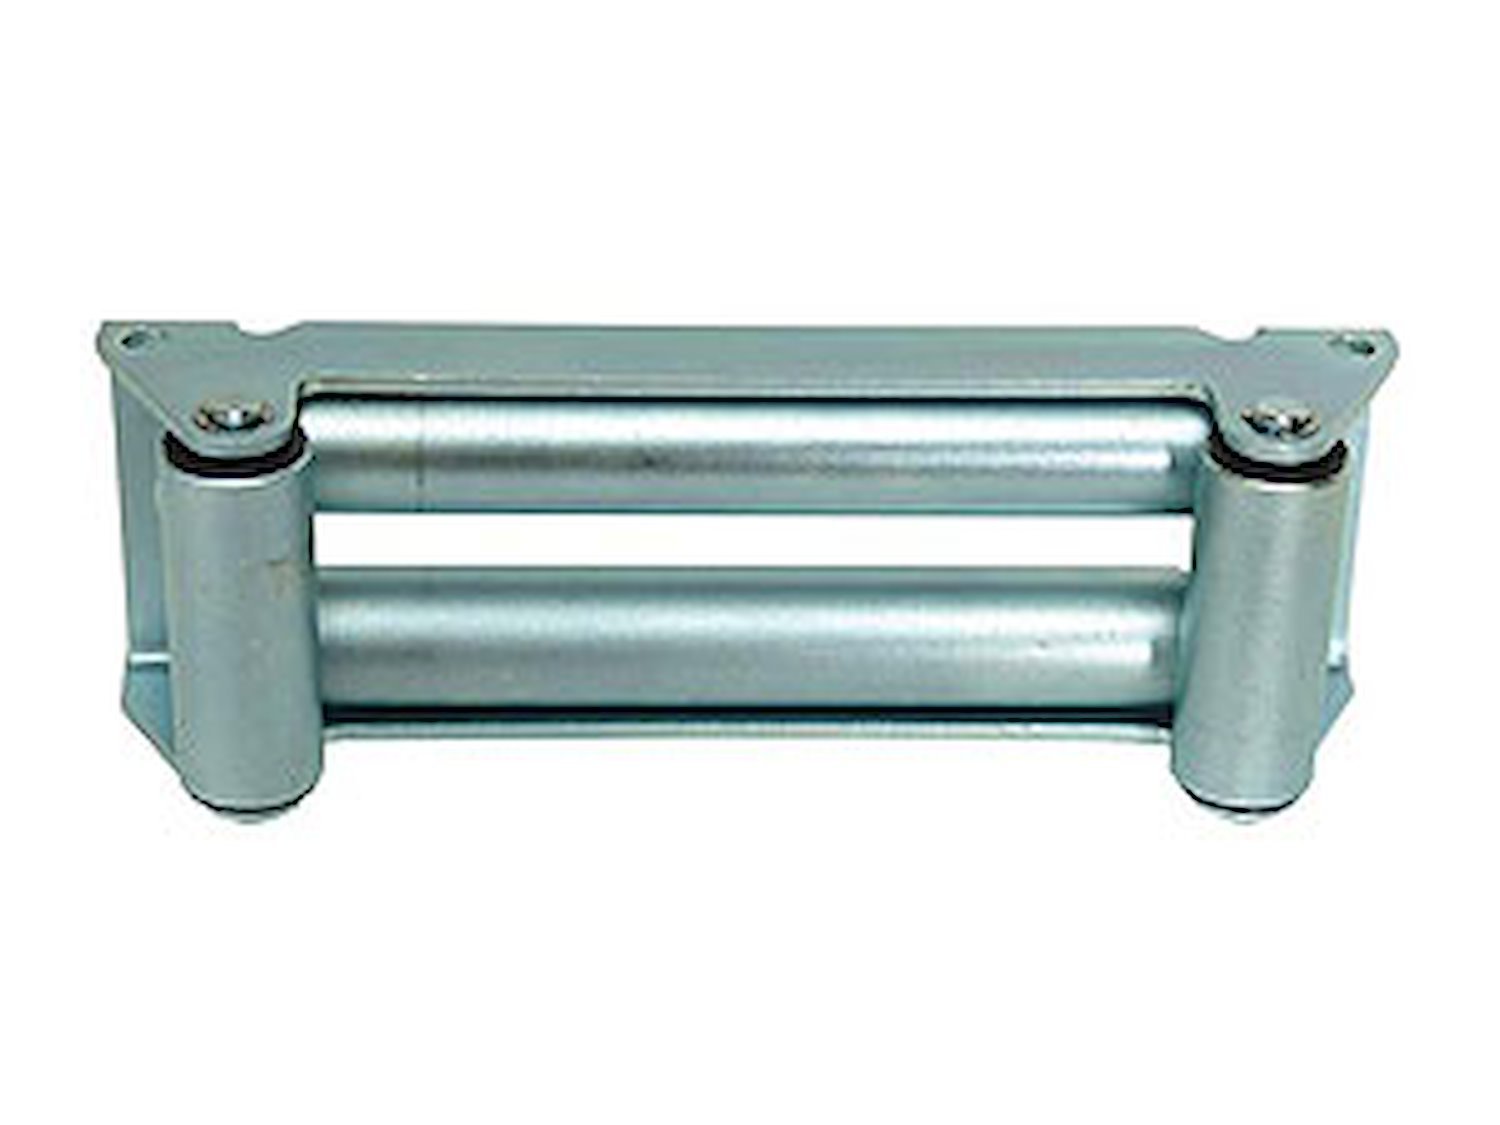 Universal Roller Fairlead Fits 8000-12000lb Mile Marker, Warn, Ramsey or Superwinch Winches